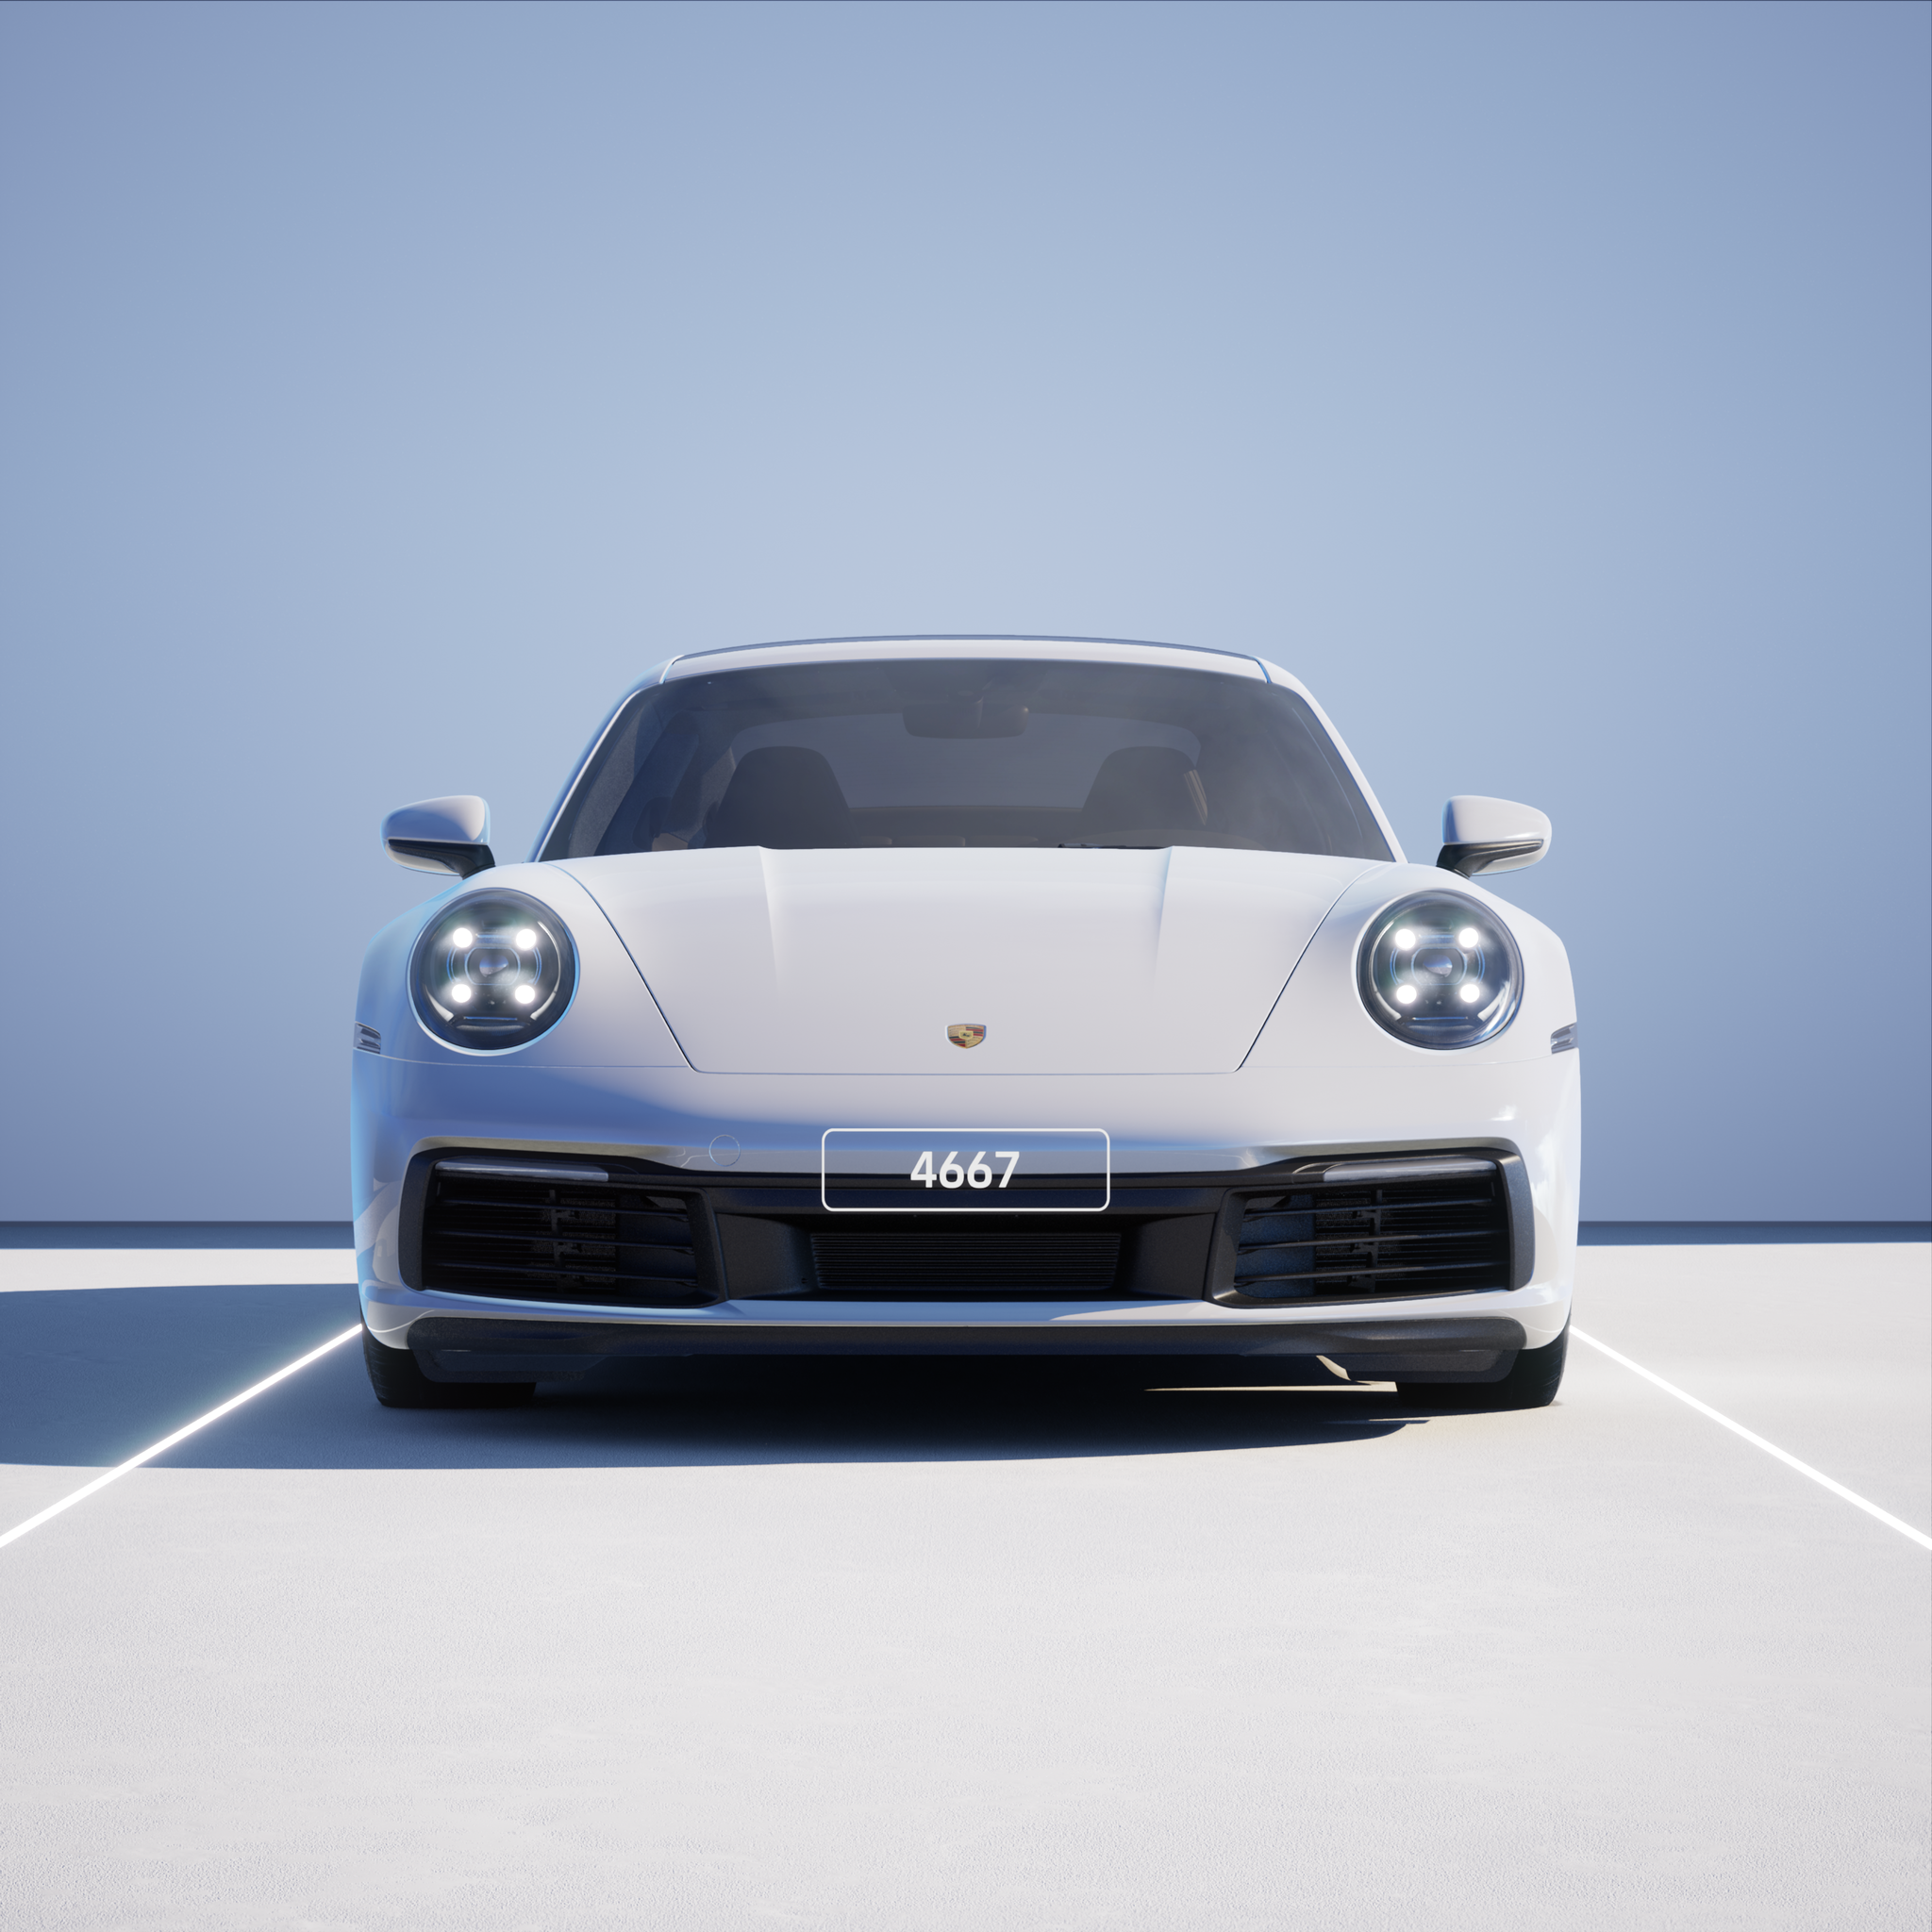 The PORSCHΞ 911 4667 image in phase